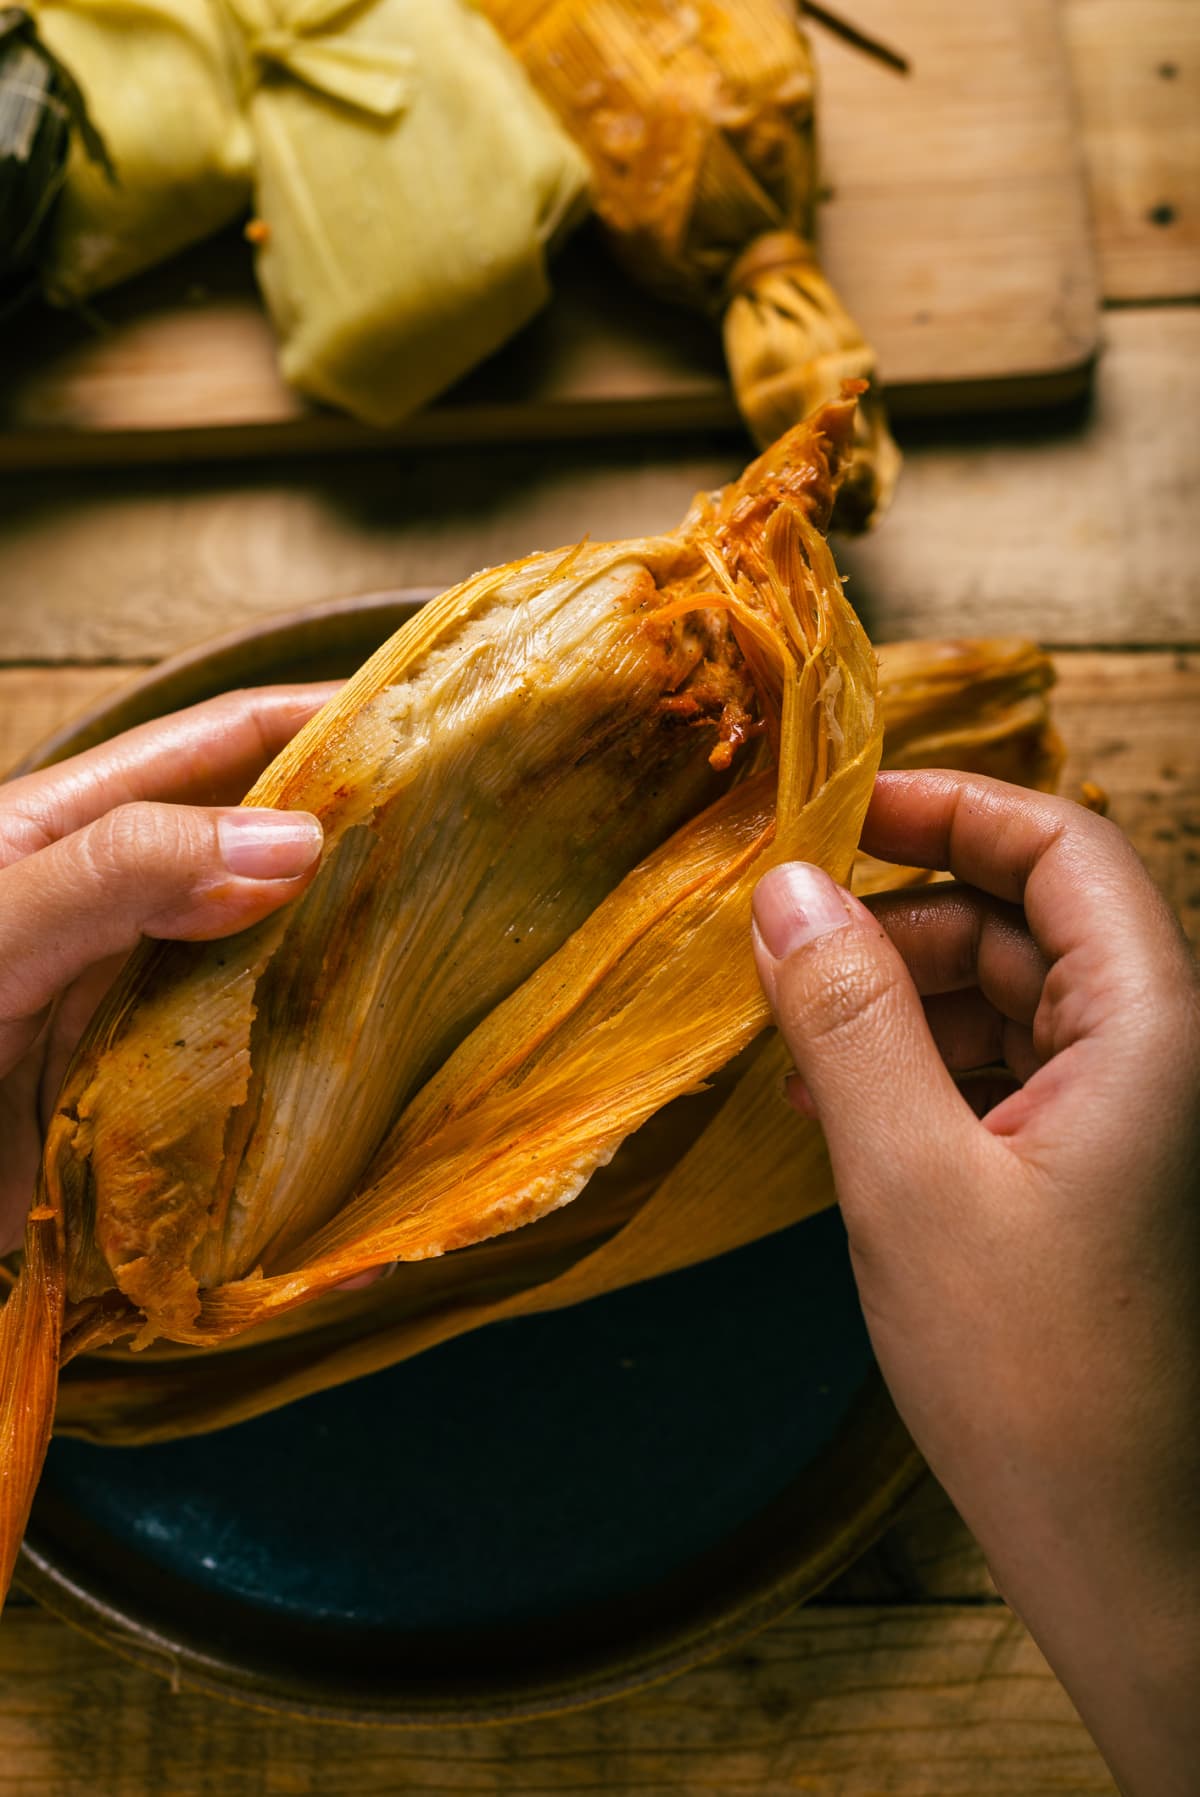 Two hands unwrapping a tamale from its corn husk